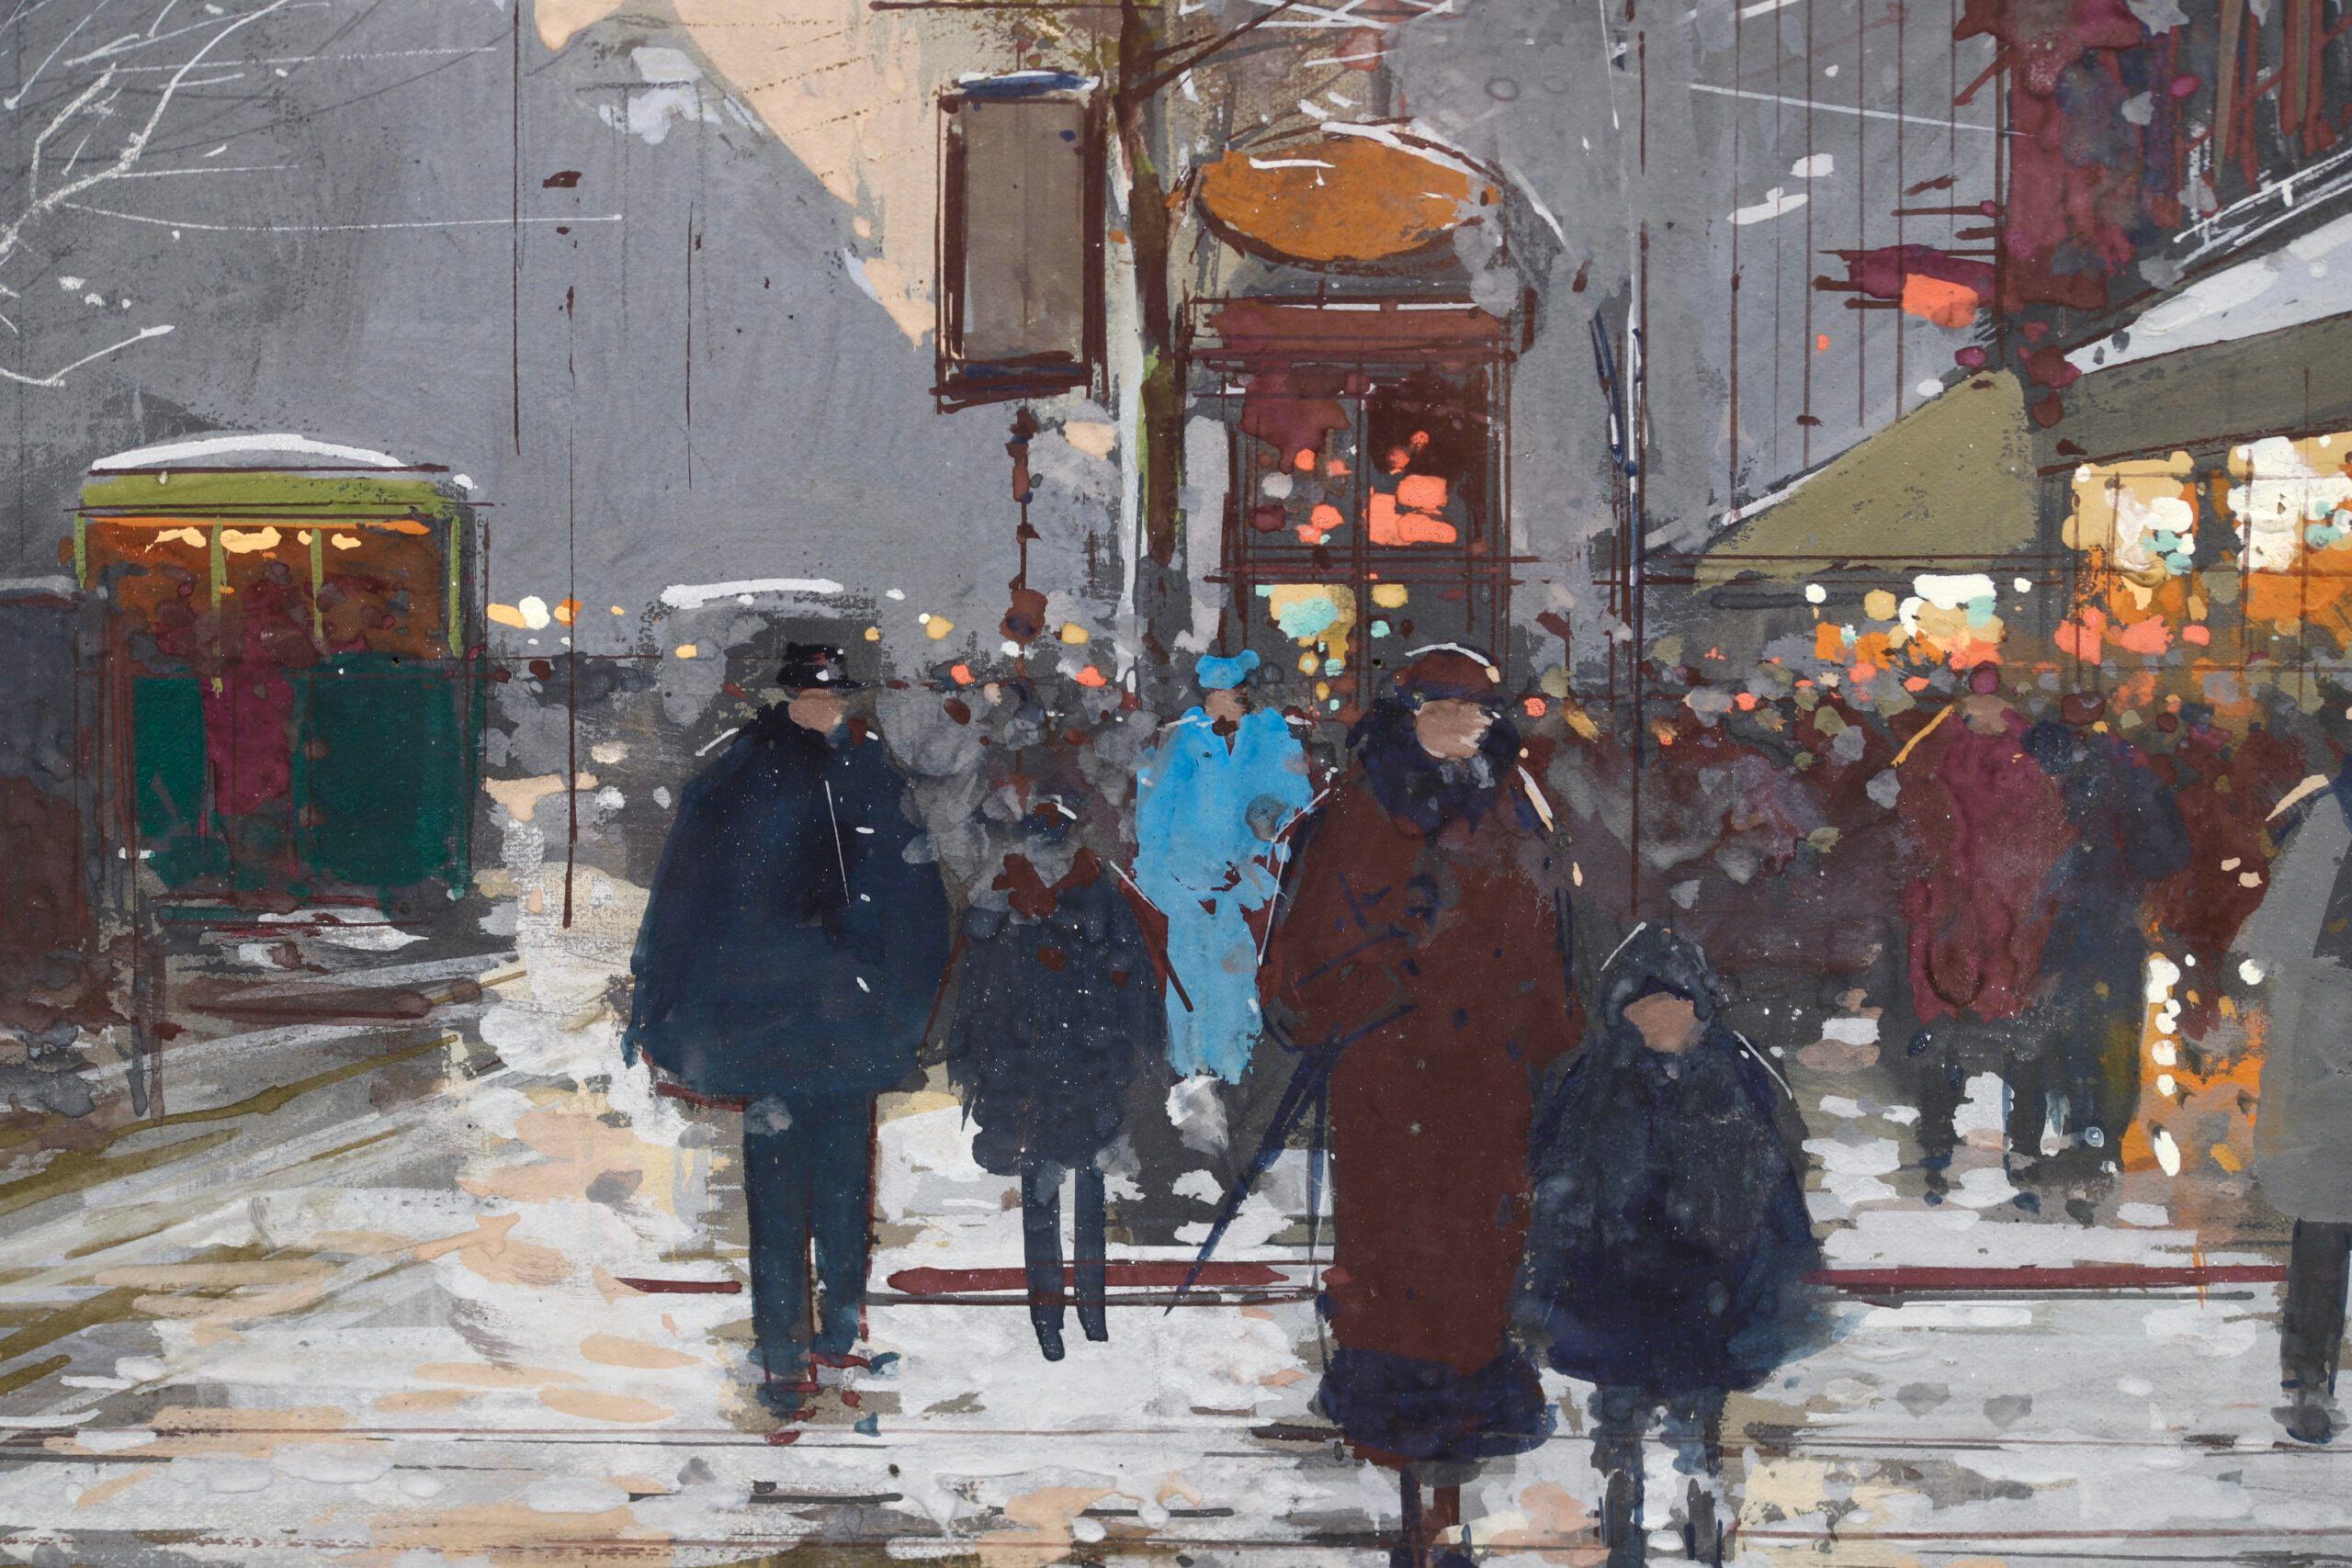 Winter - Porte St Denis - Impressionist Cityscape Painting by Edouard Cortes 5